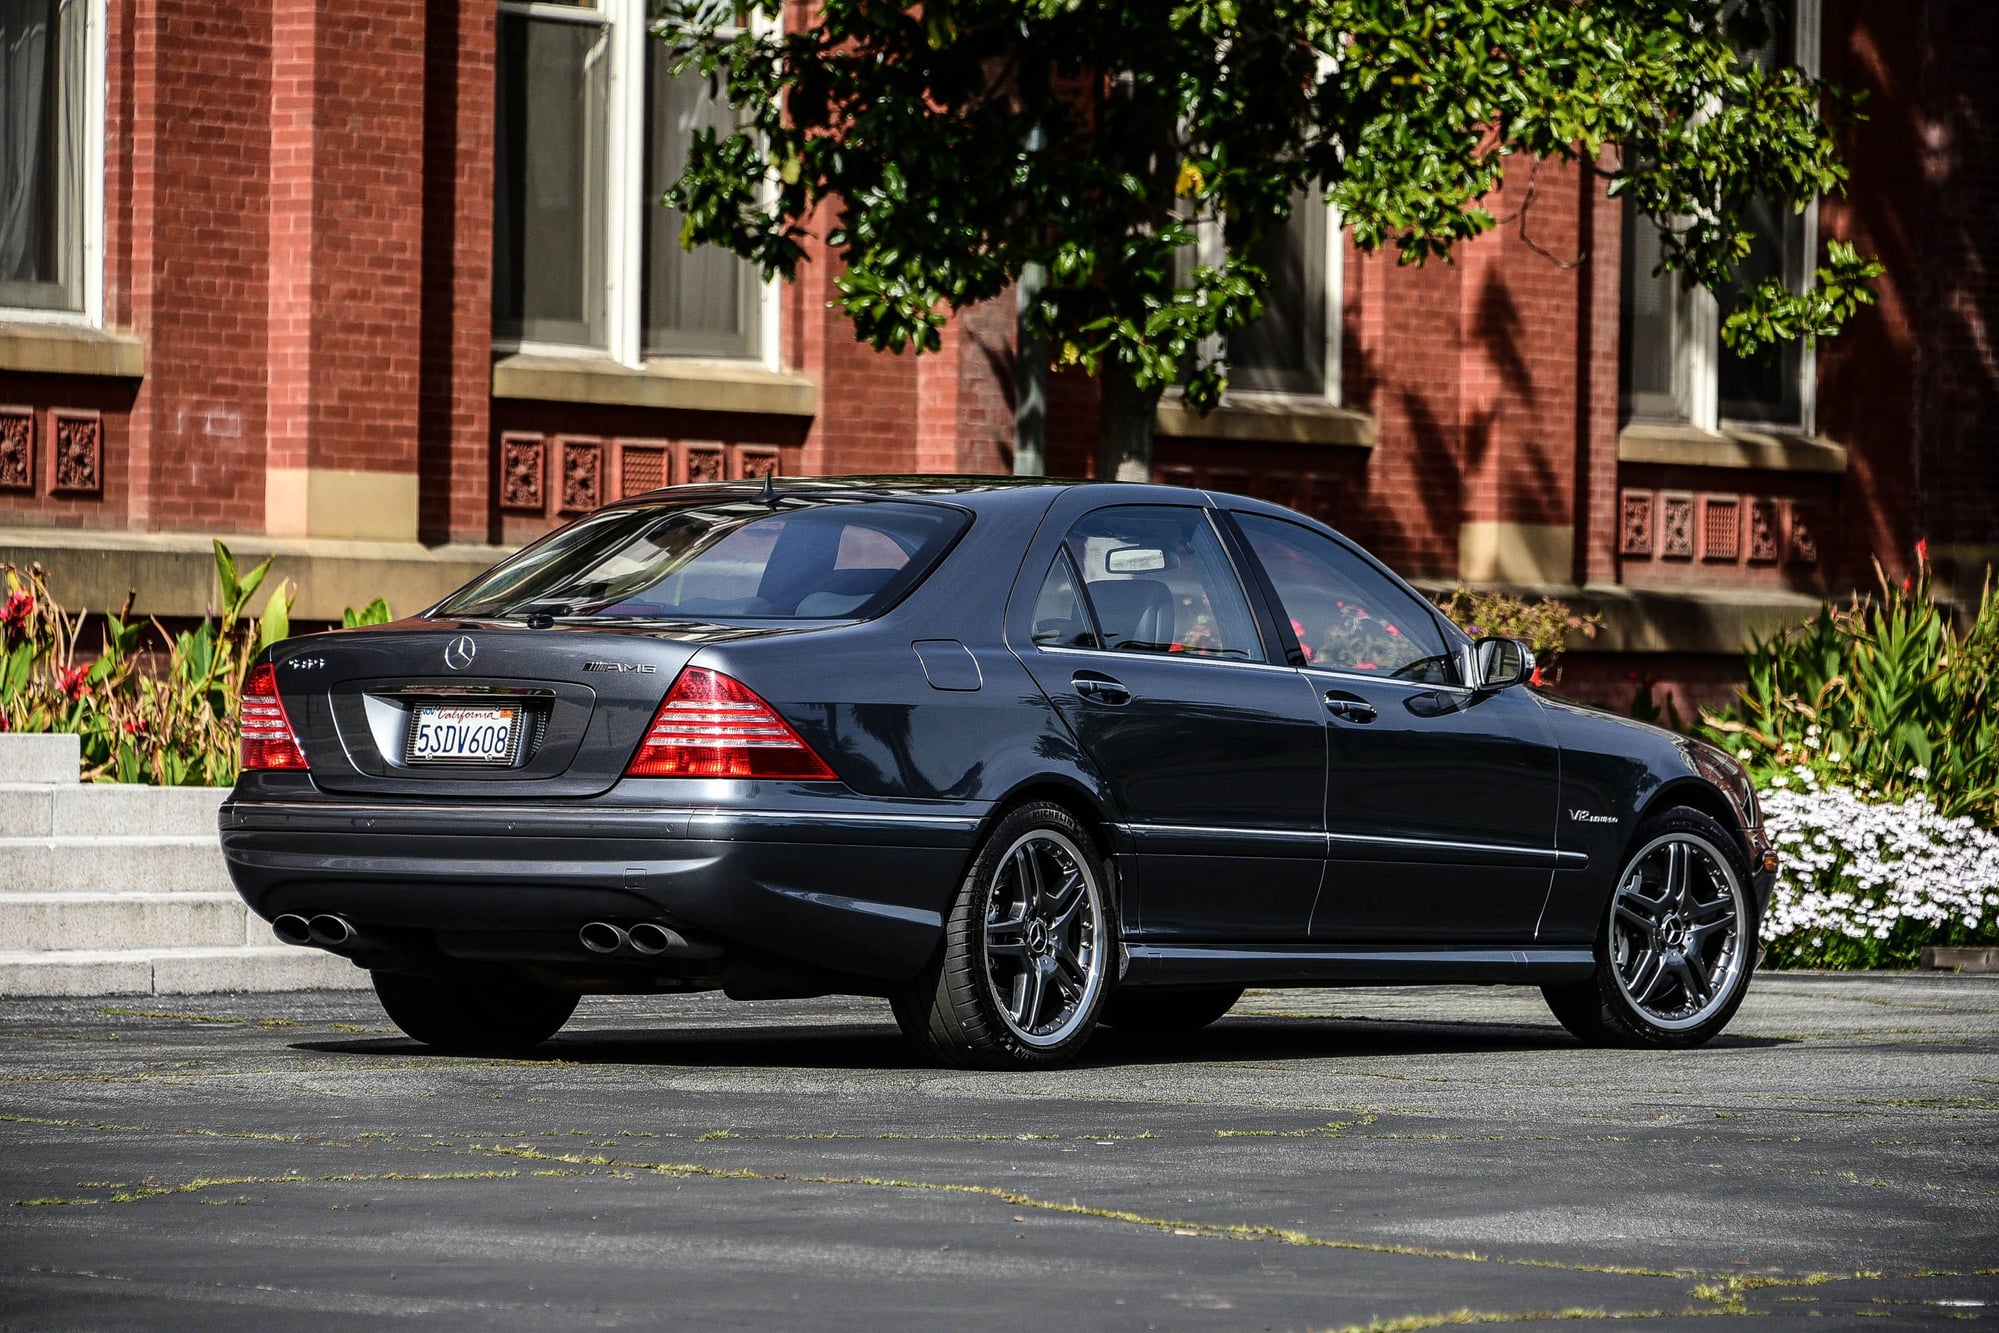 2006 Mercedes-Benz S65 AMG - FS: 2006 Mercedes S65 AMG - Designo Graphite Metallic, 68K miles - Used - VIN WDBNG79JX6A471936 - 68,000 Miles - 12 cyl - 2WD - Automatic - Menlo Park, CA 94025, United States